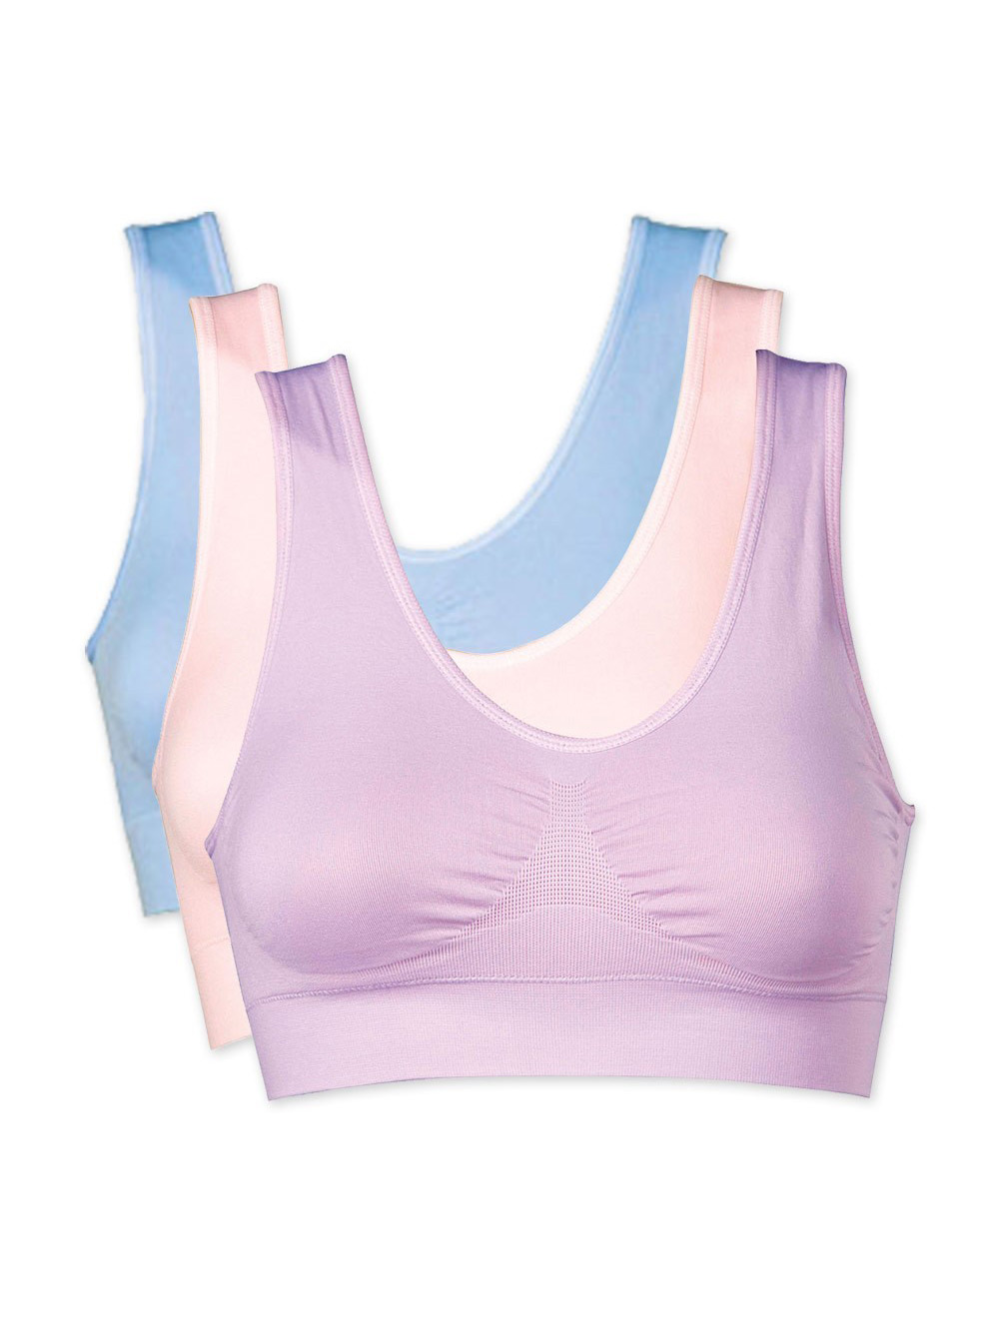 Comfortable Genie Bras for All-Day Wear